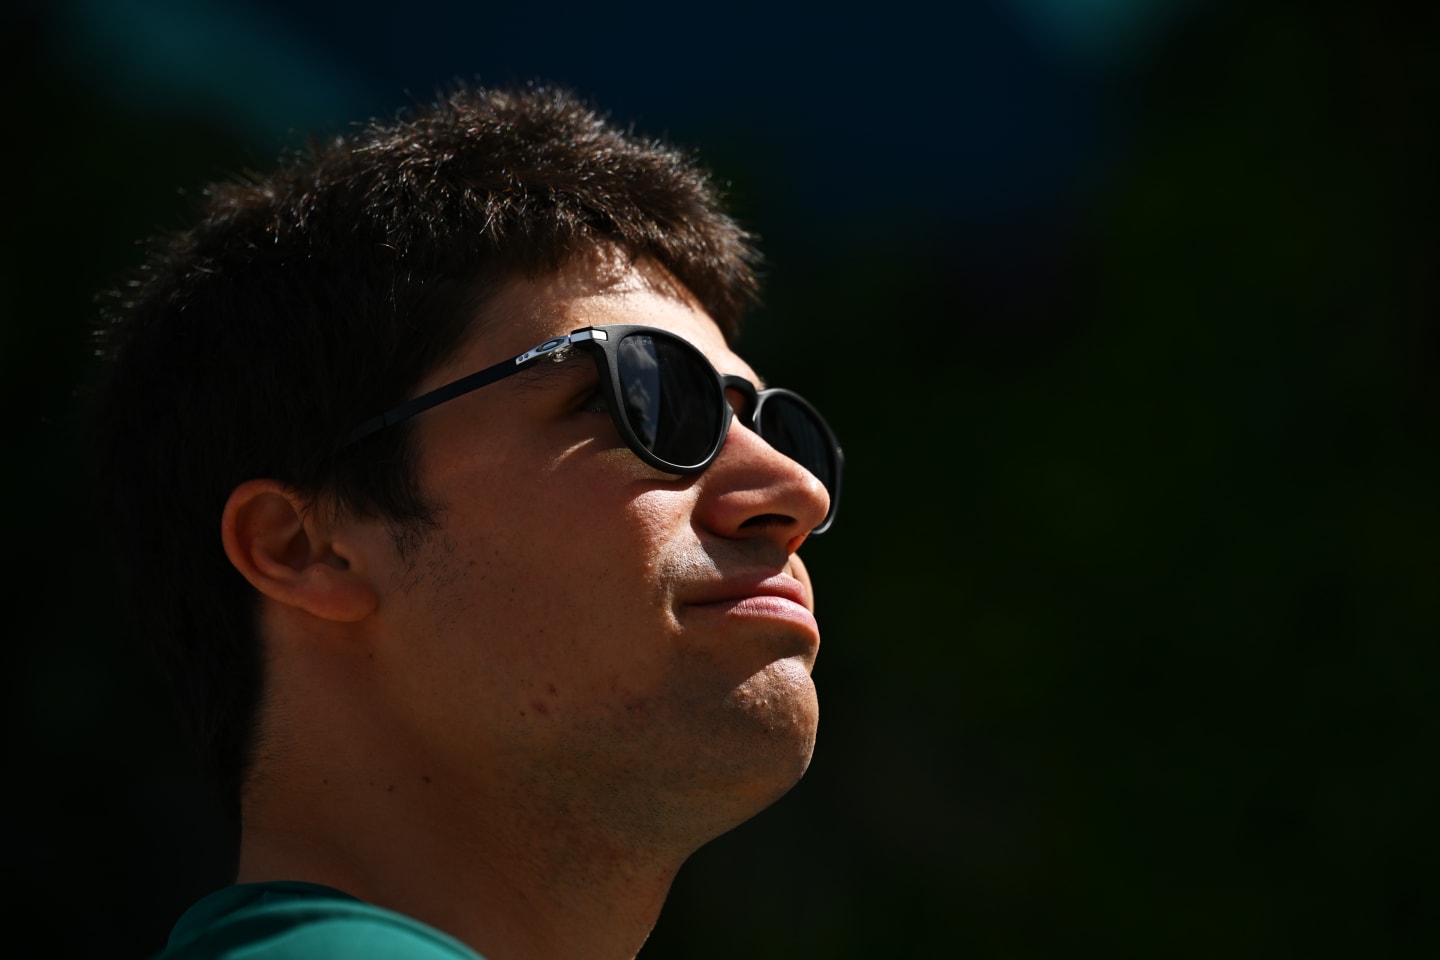 MIAMI, FLORIDA - MAY 08: Lance Stroll of Canada and Aston Martin F1 Team looks on in the Paddock prior to the F1 Grand Prix of Miami at the Miami International Autodrome on May 08, 2022 in Miami, Florida. (Photo by Clive Mason - Formula 1/Formula 1 via Getty Images)